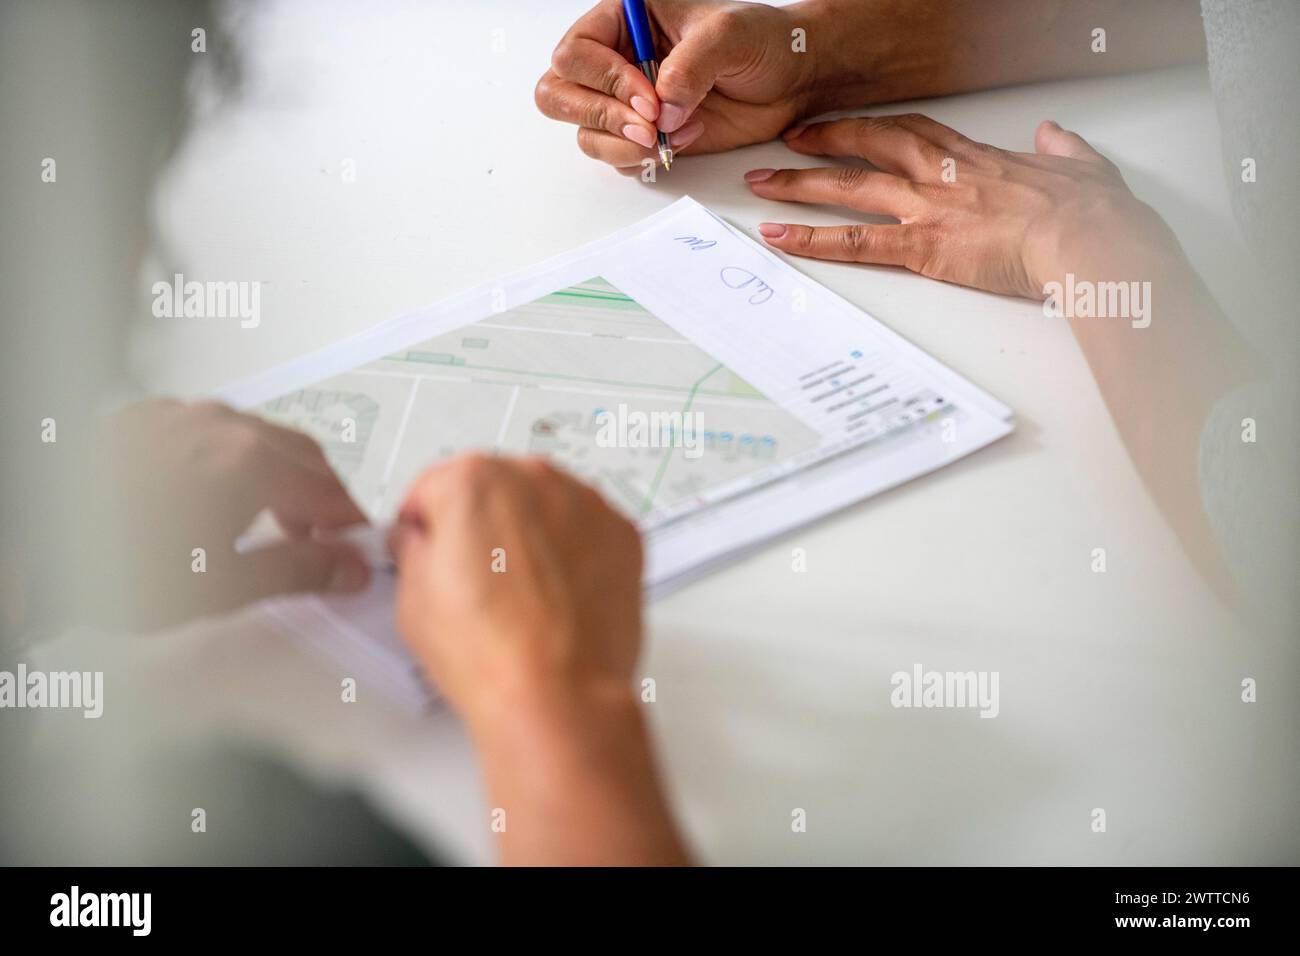 Two people collaborating over a project plan Stock Photo